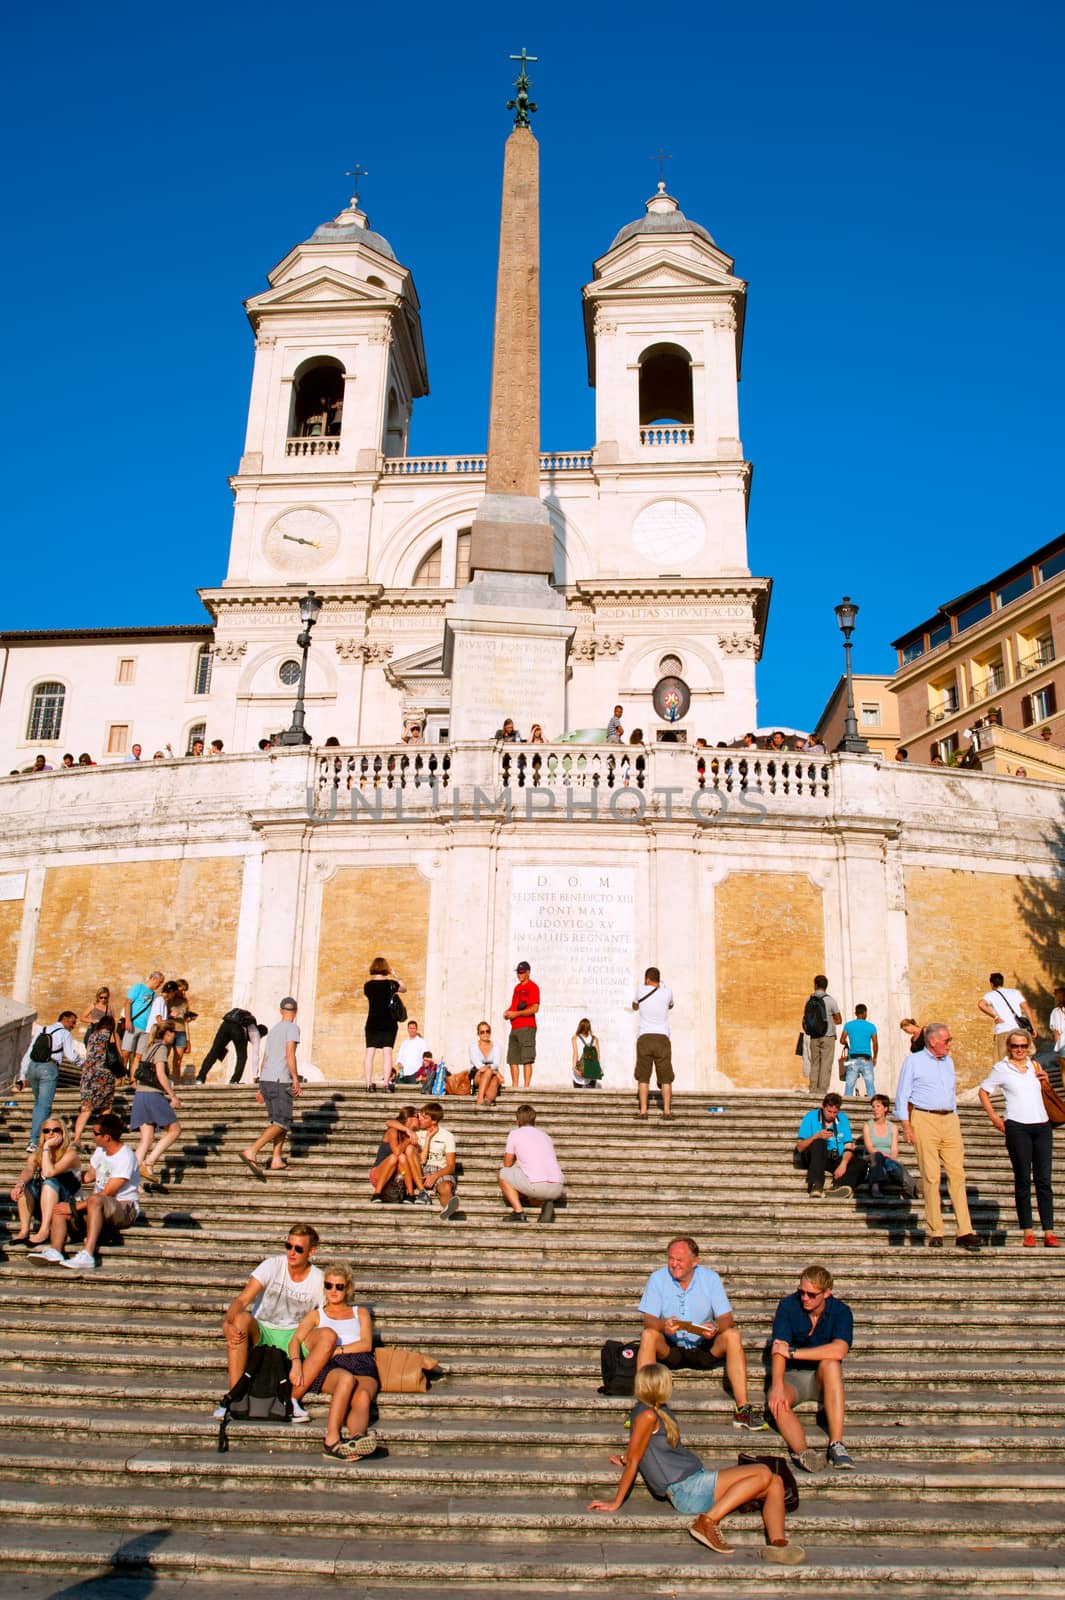 Rome, Italy -  September 27, 2013: Crowd sitting on the Spanish Steps onin Rome, Italy. With 138 steps in total, the Spanish Steps of Rome are the longest and widest outdoor steps in Europe.